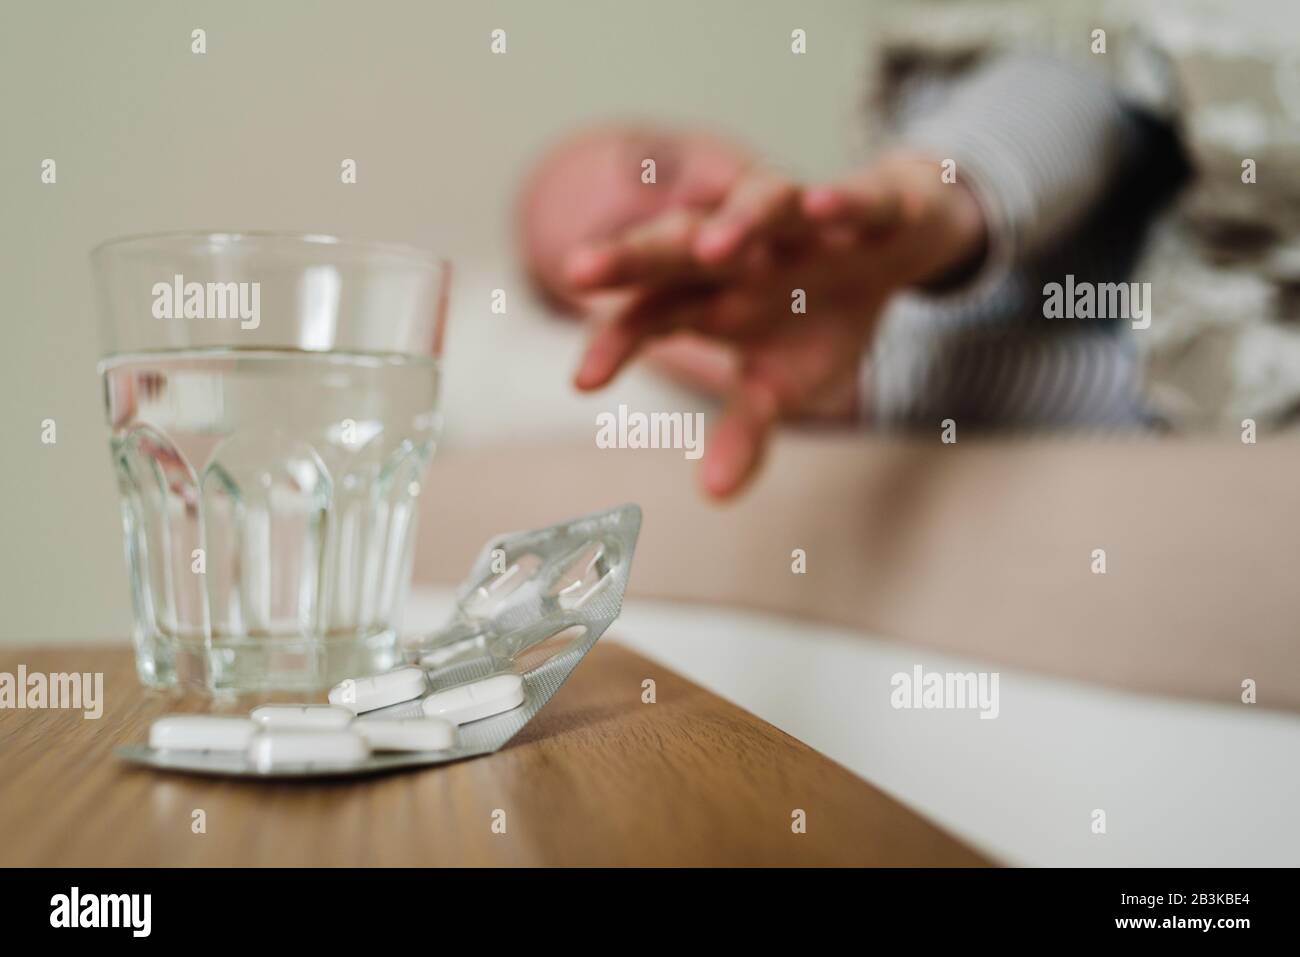 Sick man lying in bed with pills and glass of water on foreground. Pulling  his hand for a glass or tablets Stock Photo - Alamy